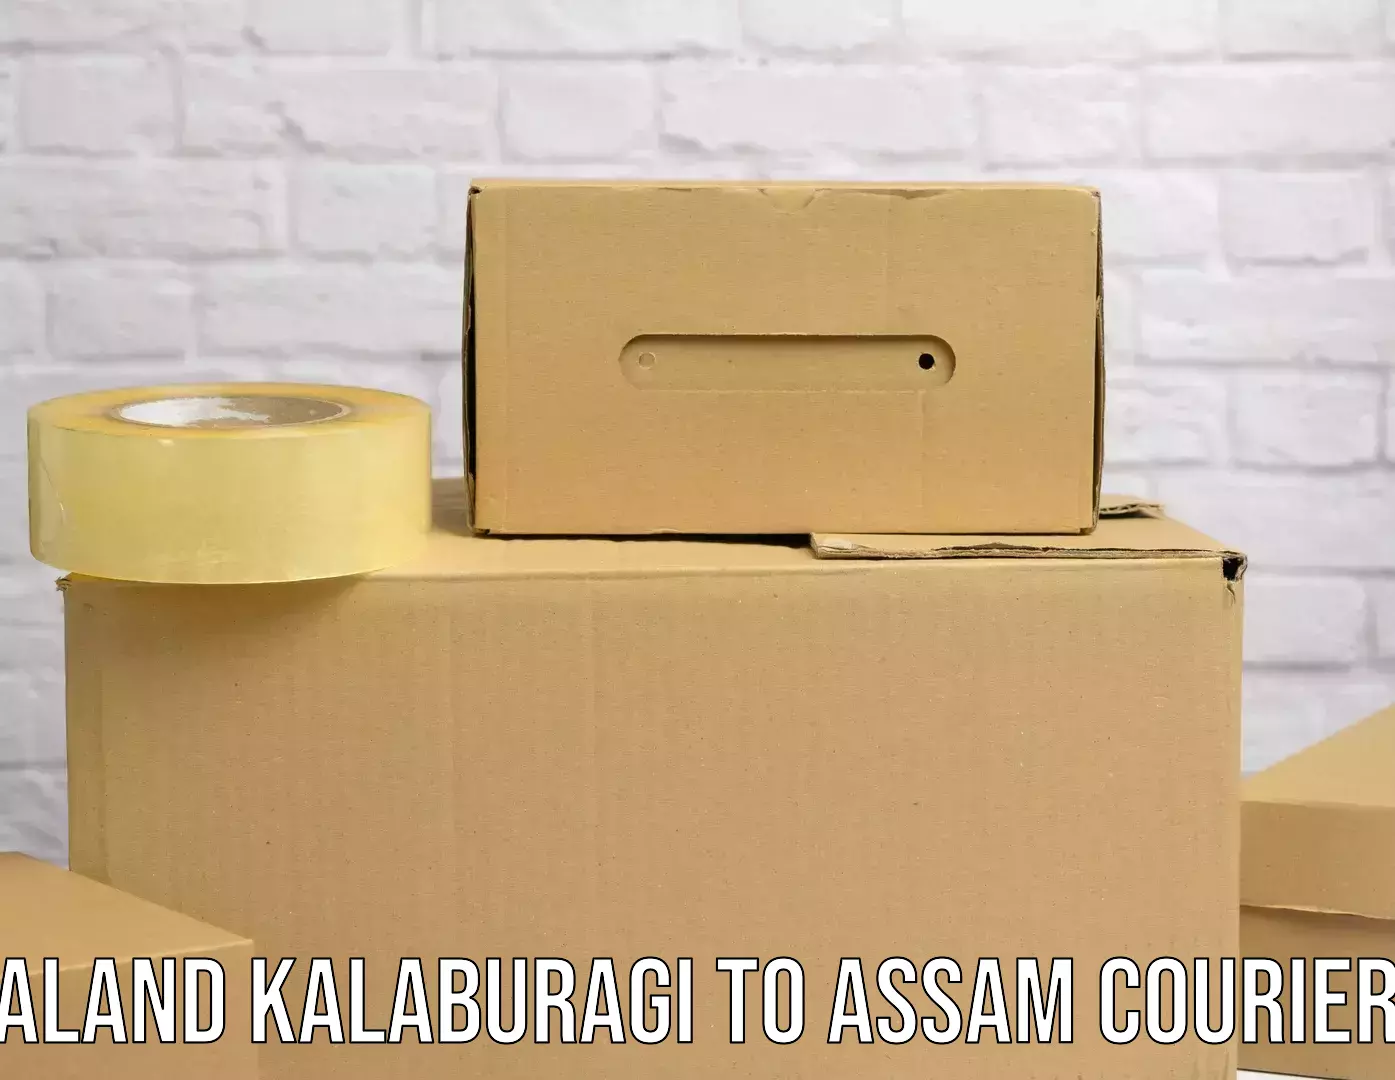 State-of-the-art courier technology Aland Kalaburagi to Mayang